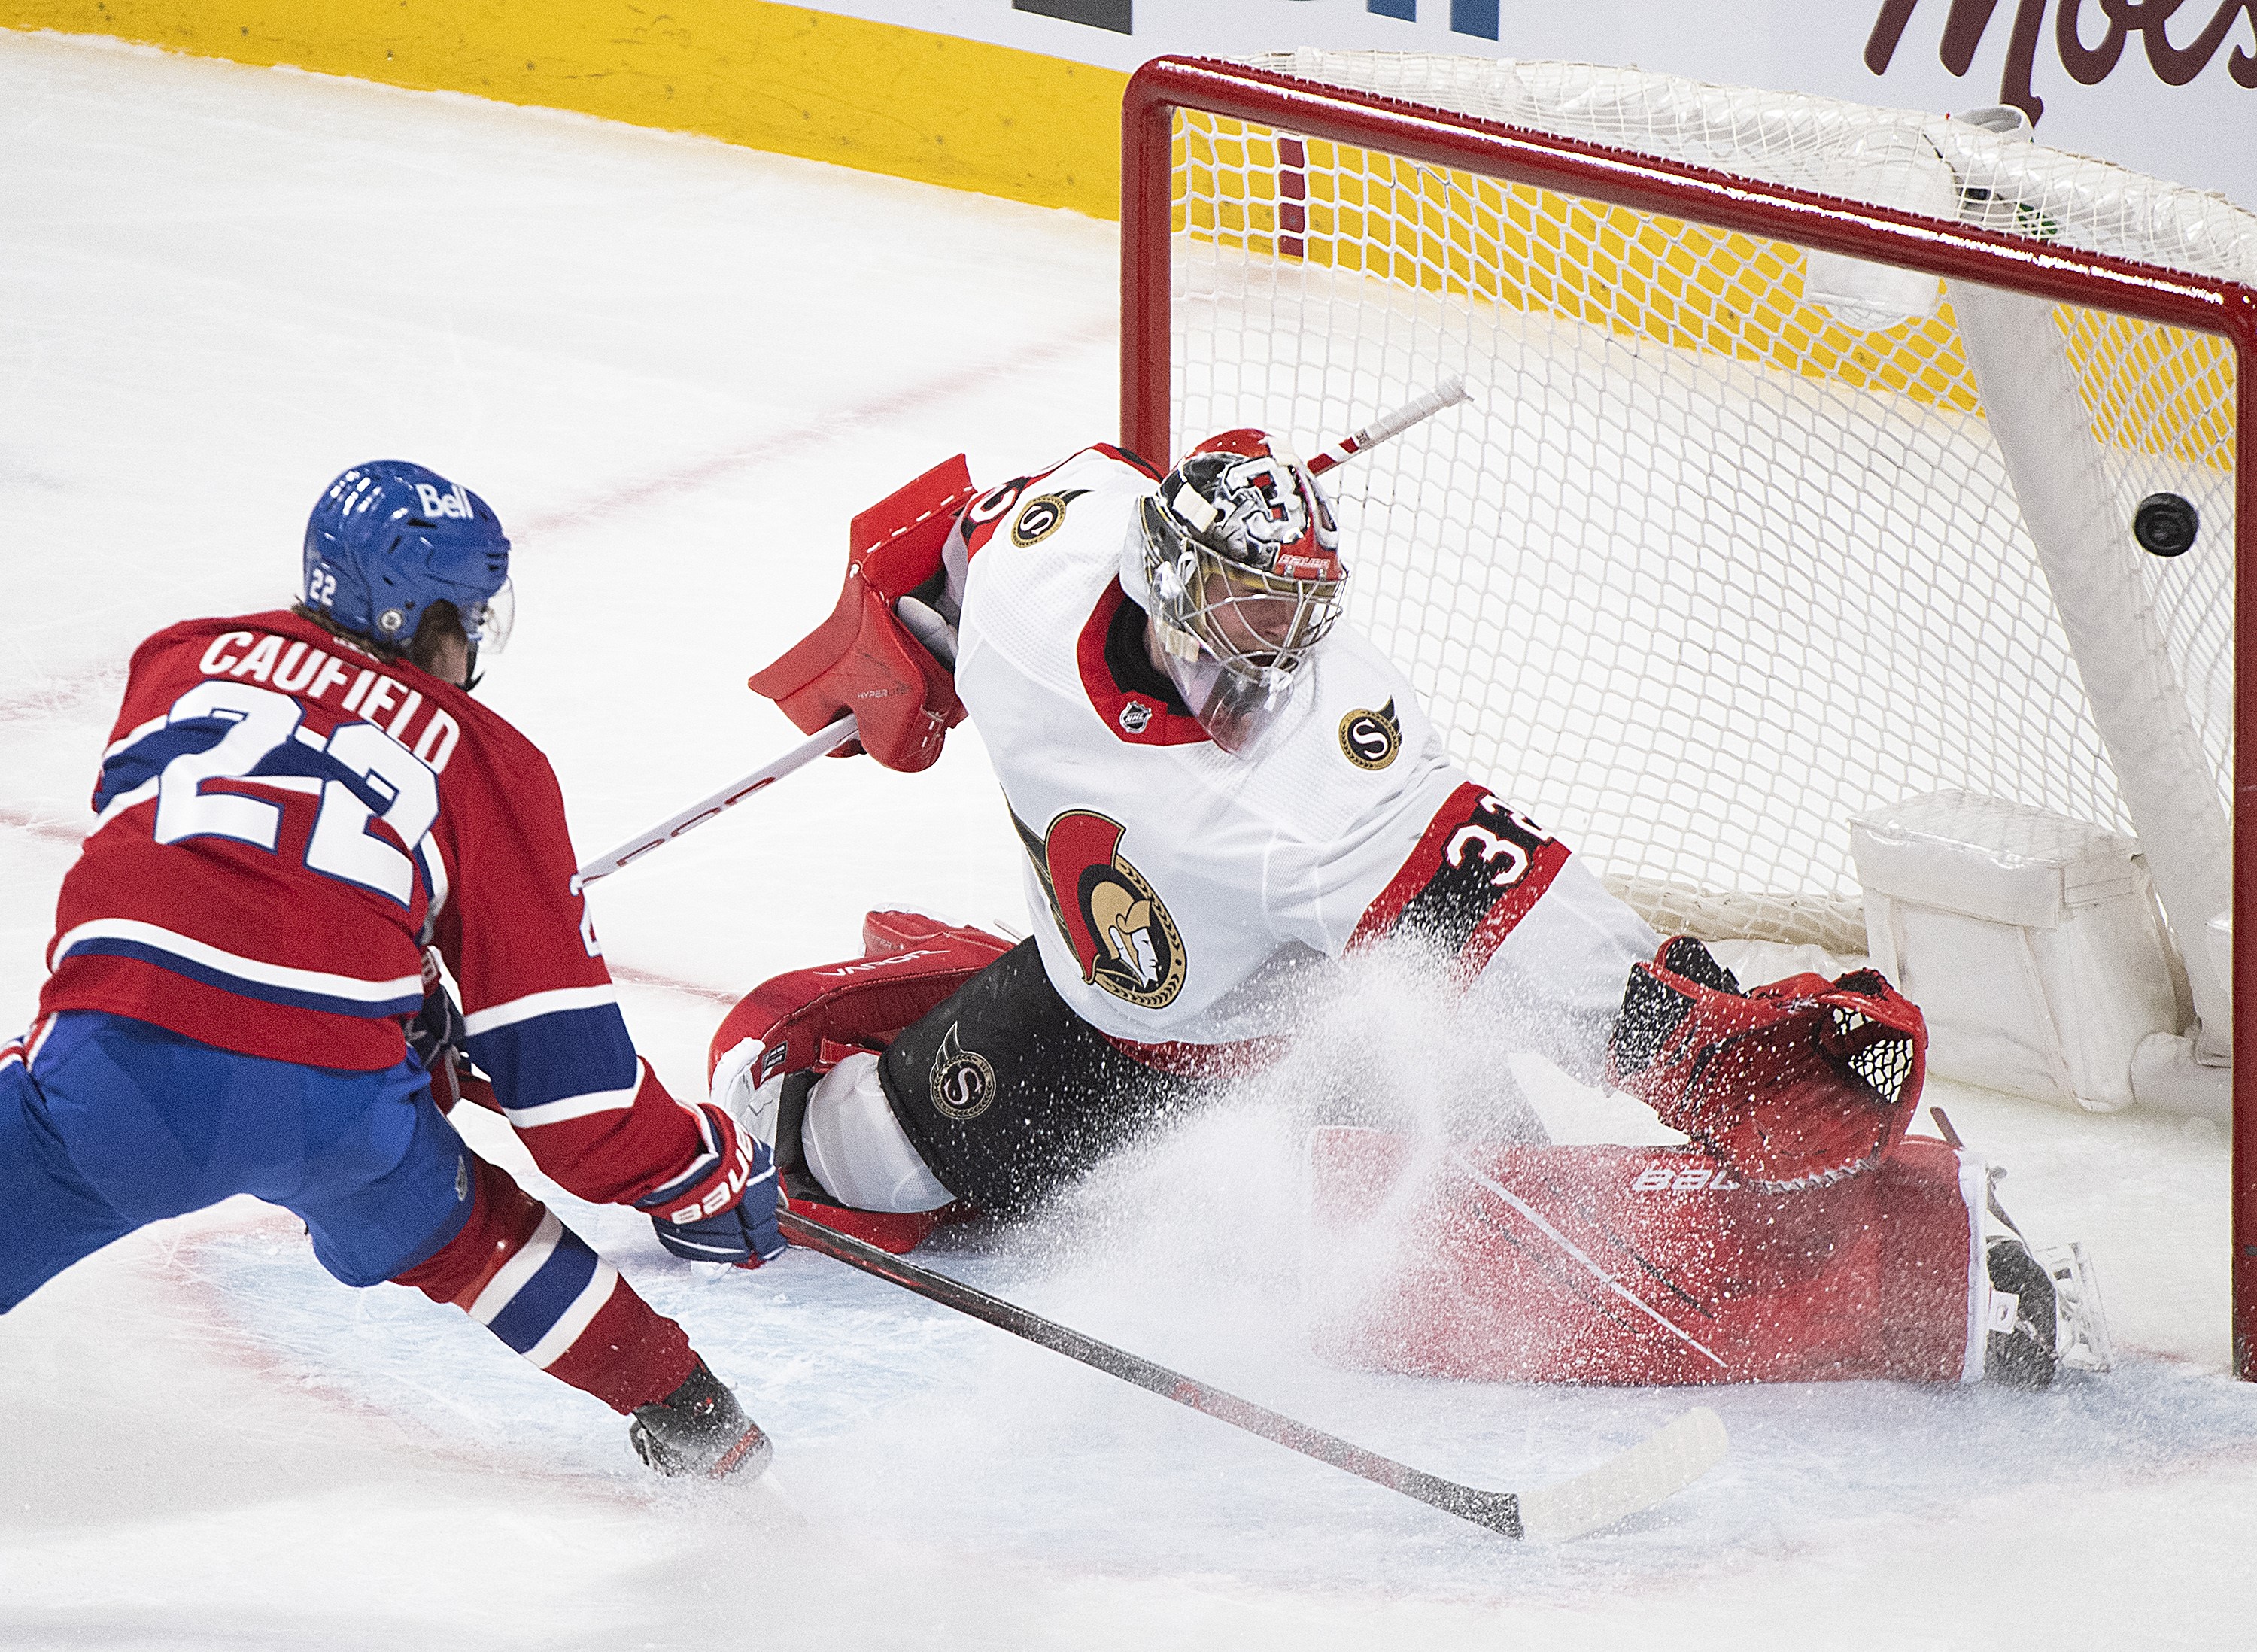 Cole Caufield scores OT winner, first career NHL goal in Montreals 3-2 win over Sens